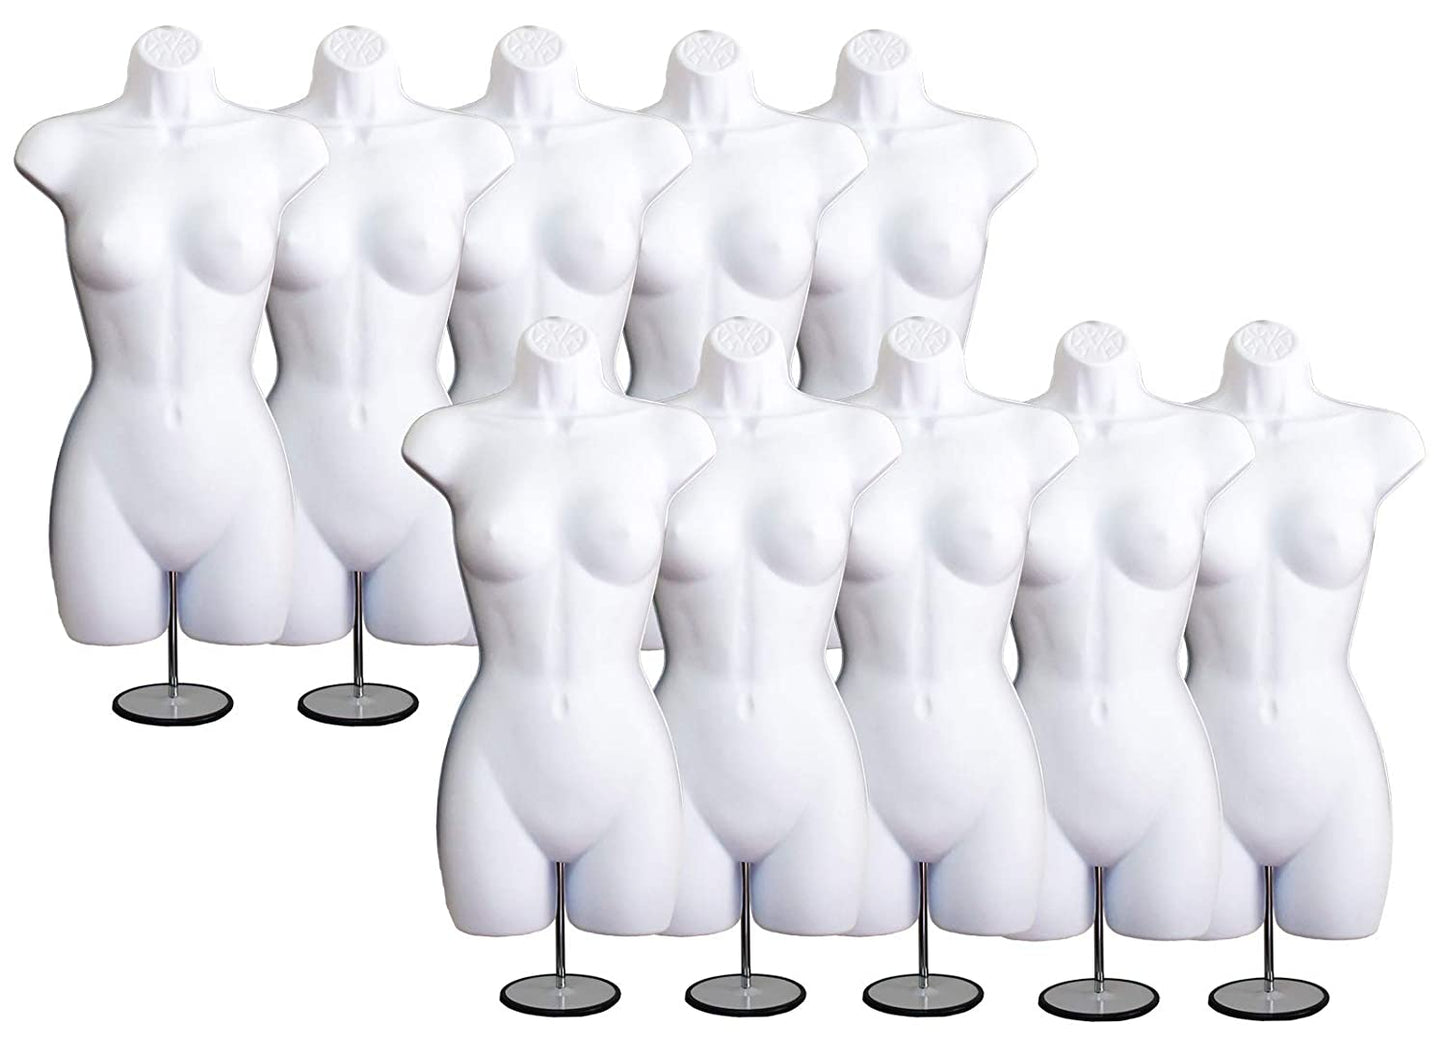 White Female Mannequin Hip Long Hollow Back Body Torso Set w/Metal Stand with Metal Pole & Hanging Hook, S-M Size